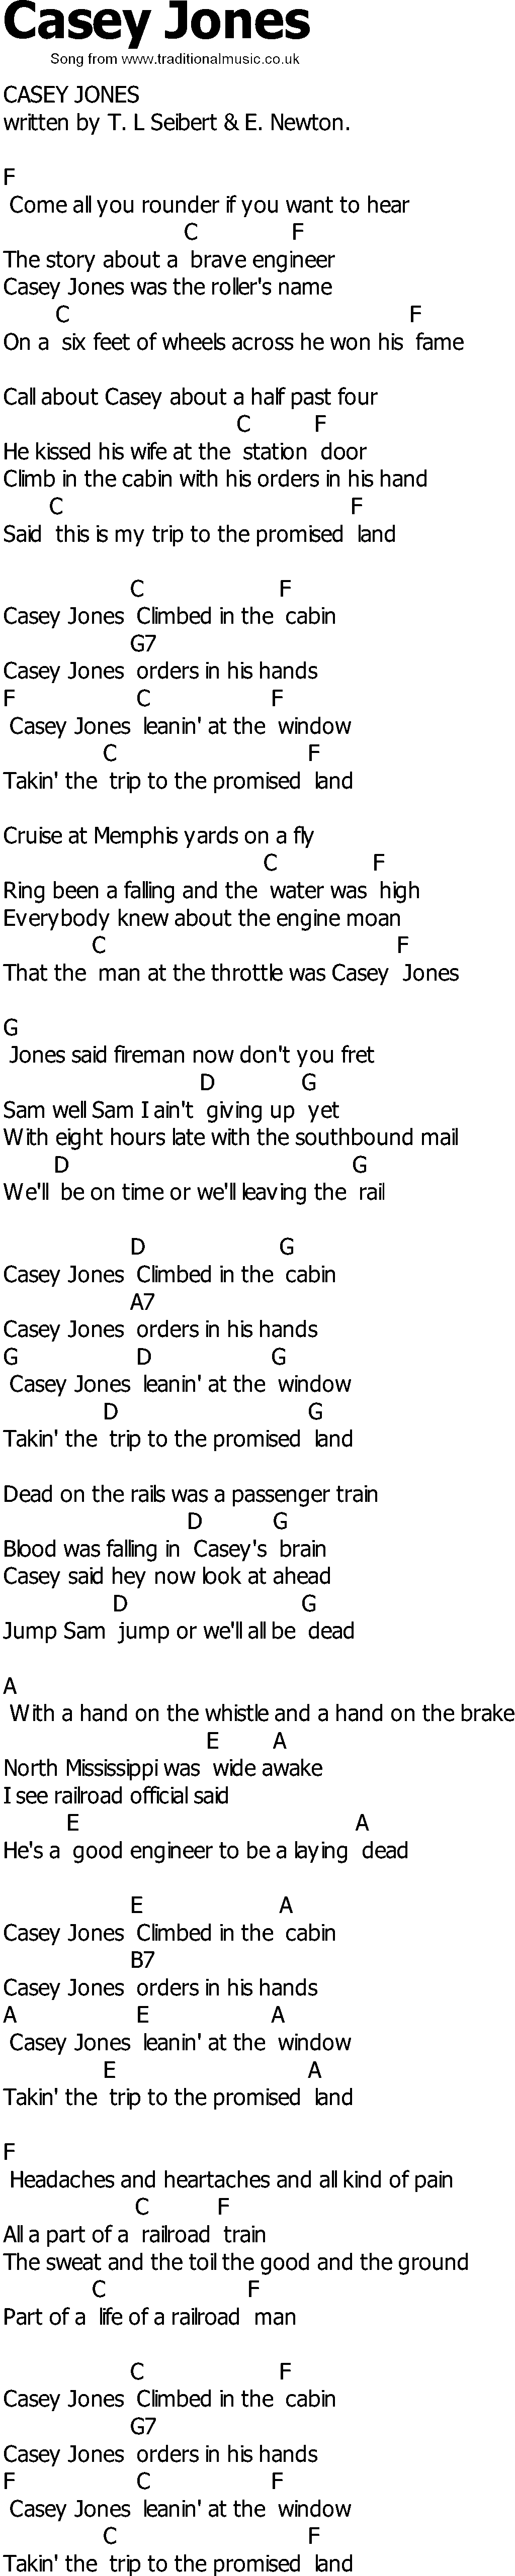 Old Country song lyrics with chords - Casey Jones